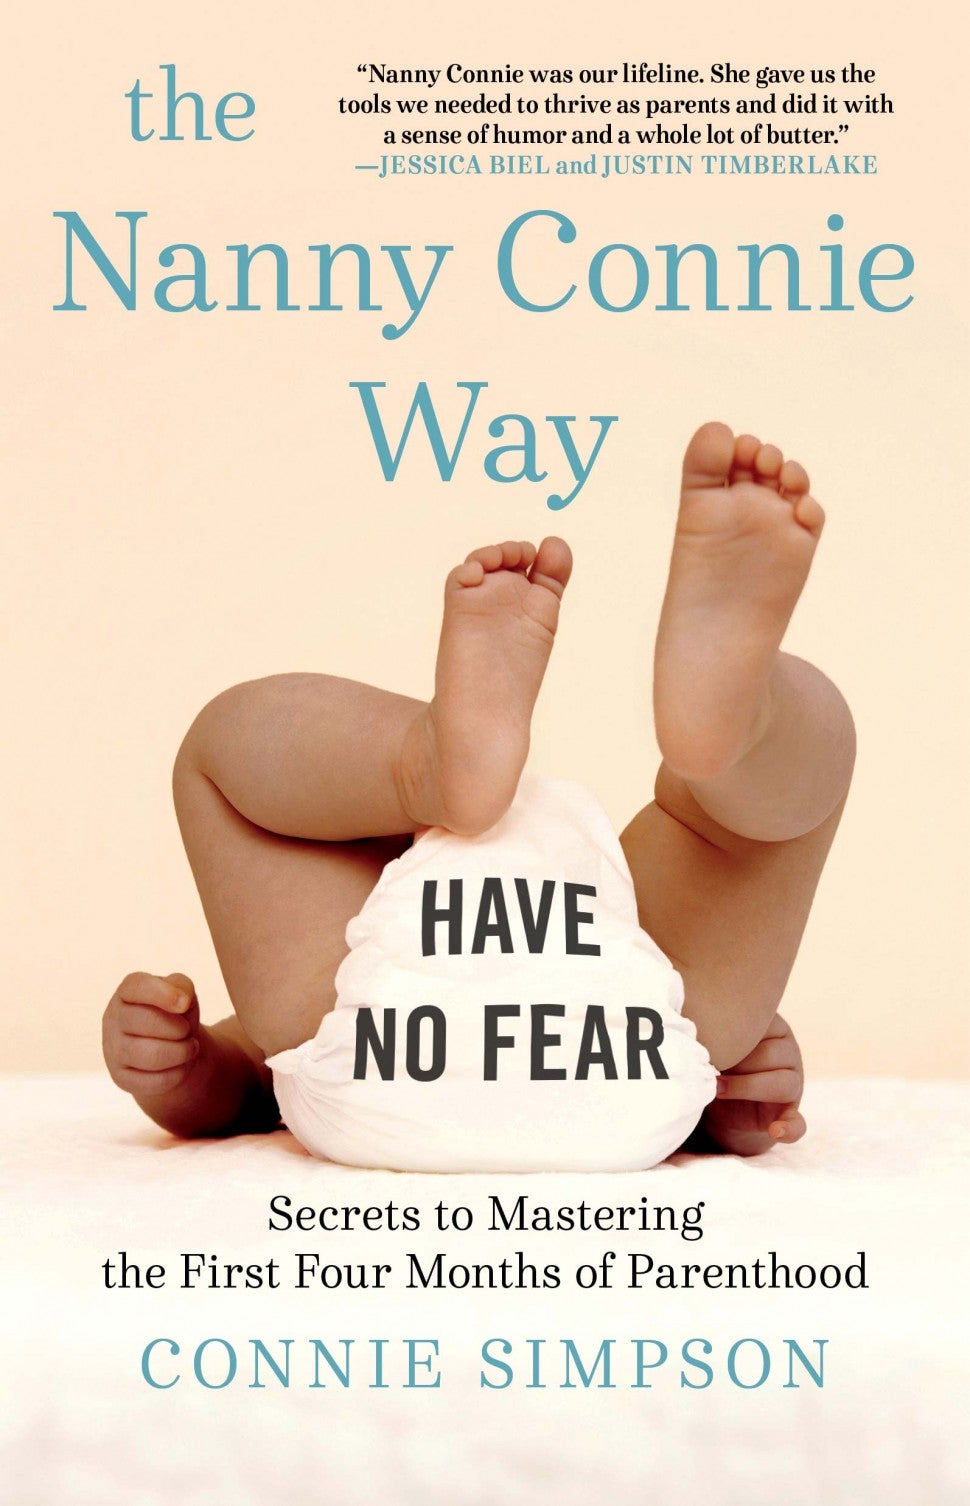 The Nannie Connie Way: Secrets to Mastering the First Four Months of Parenthood